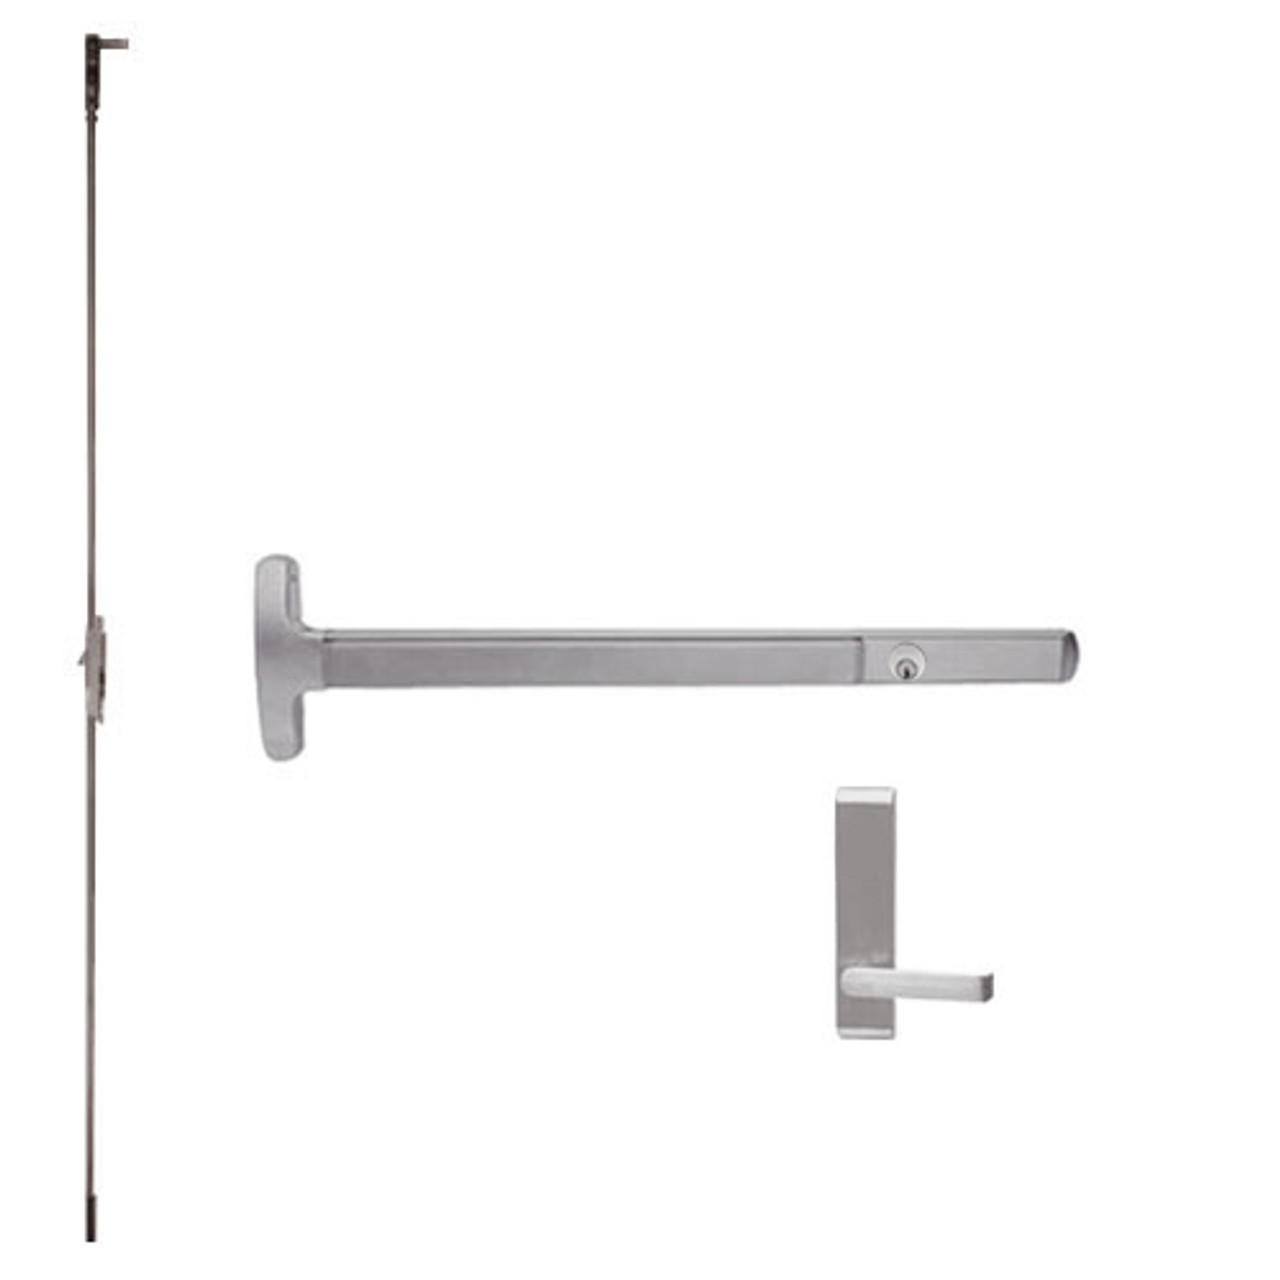 CD24-C-L-BE-DANE-US32D-2-LHR Falcon Exit Device in Satin Stainless Steel